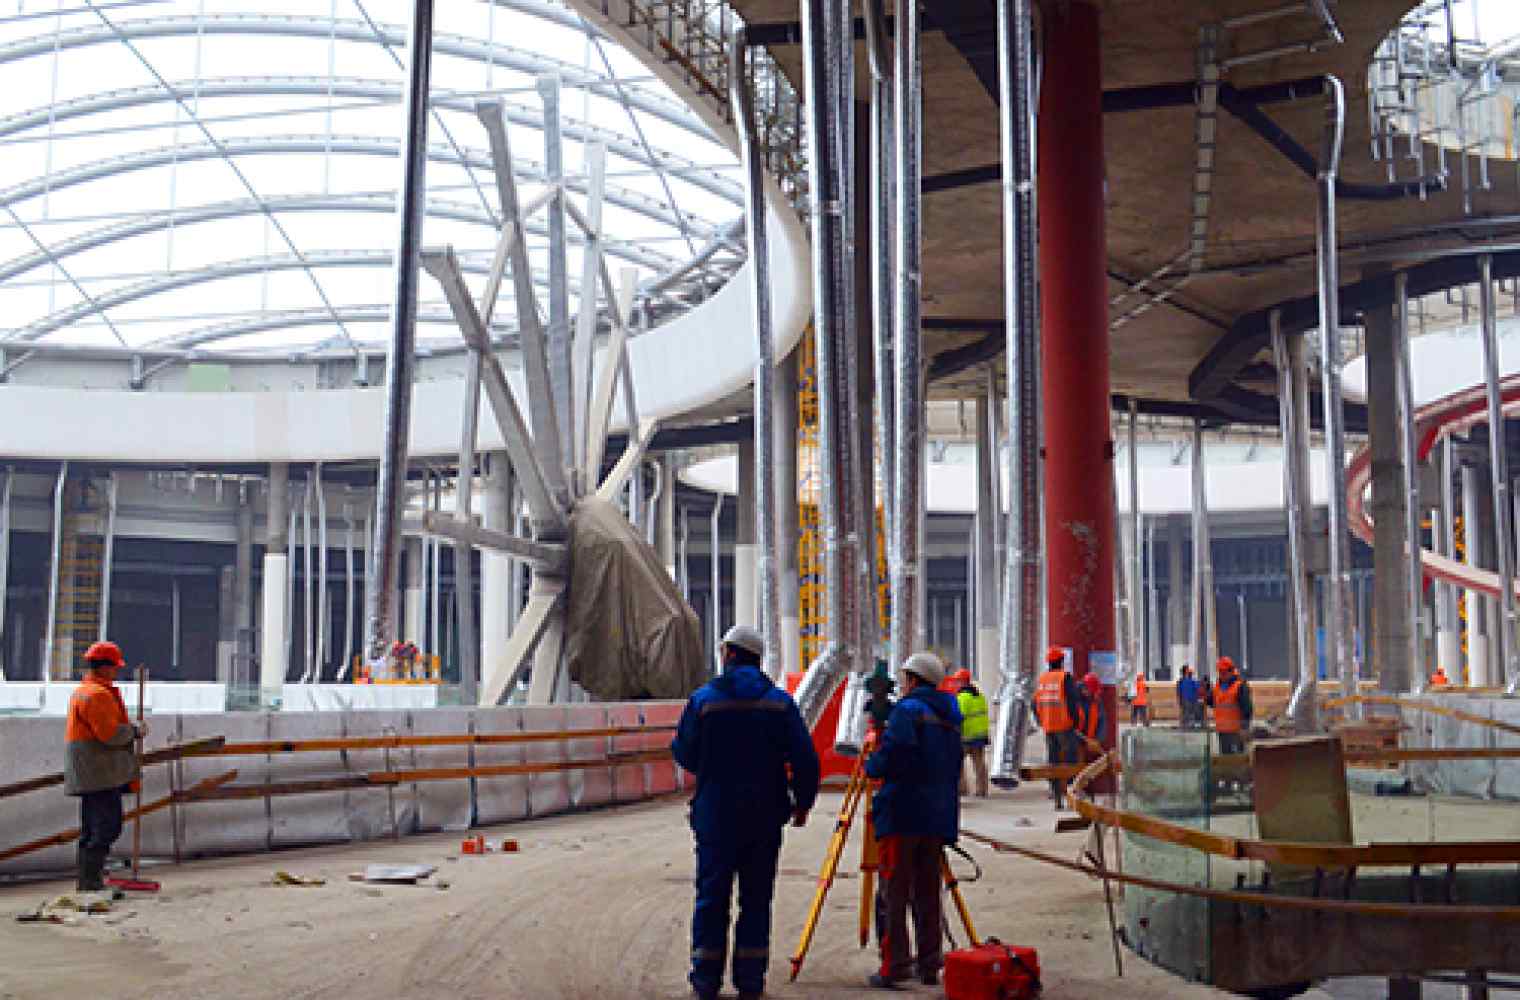 The hugest capital mall Respublika will be opened on time